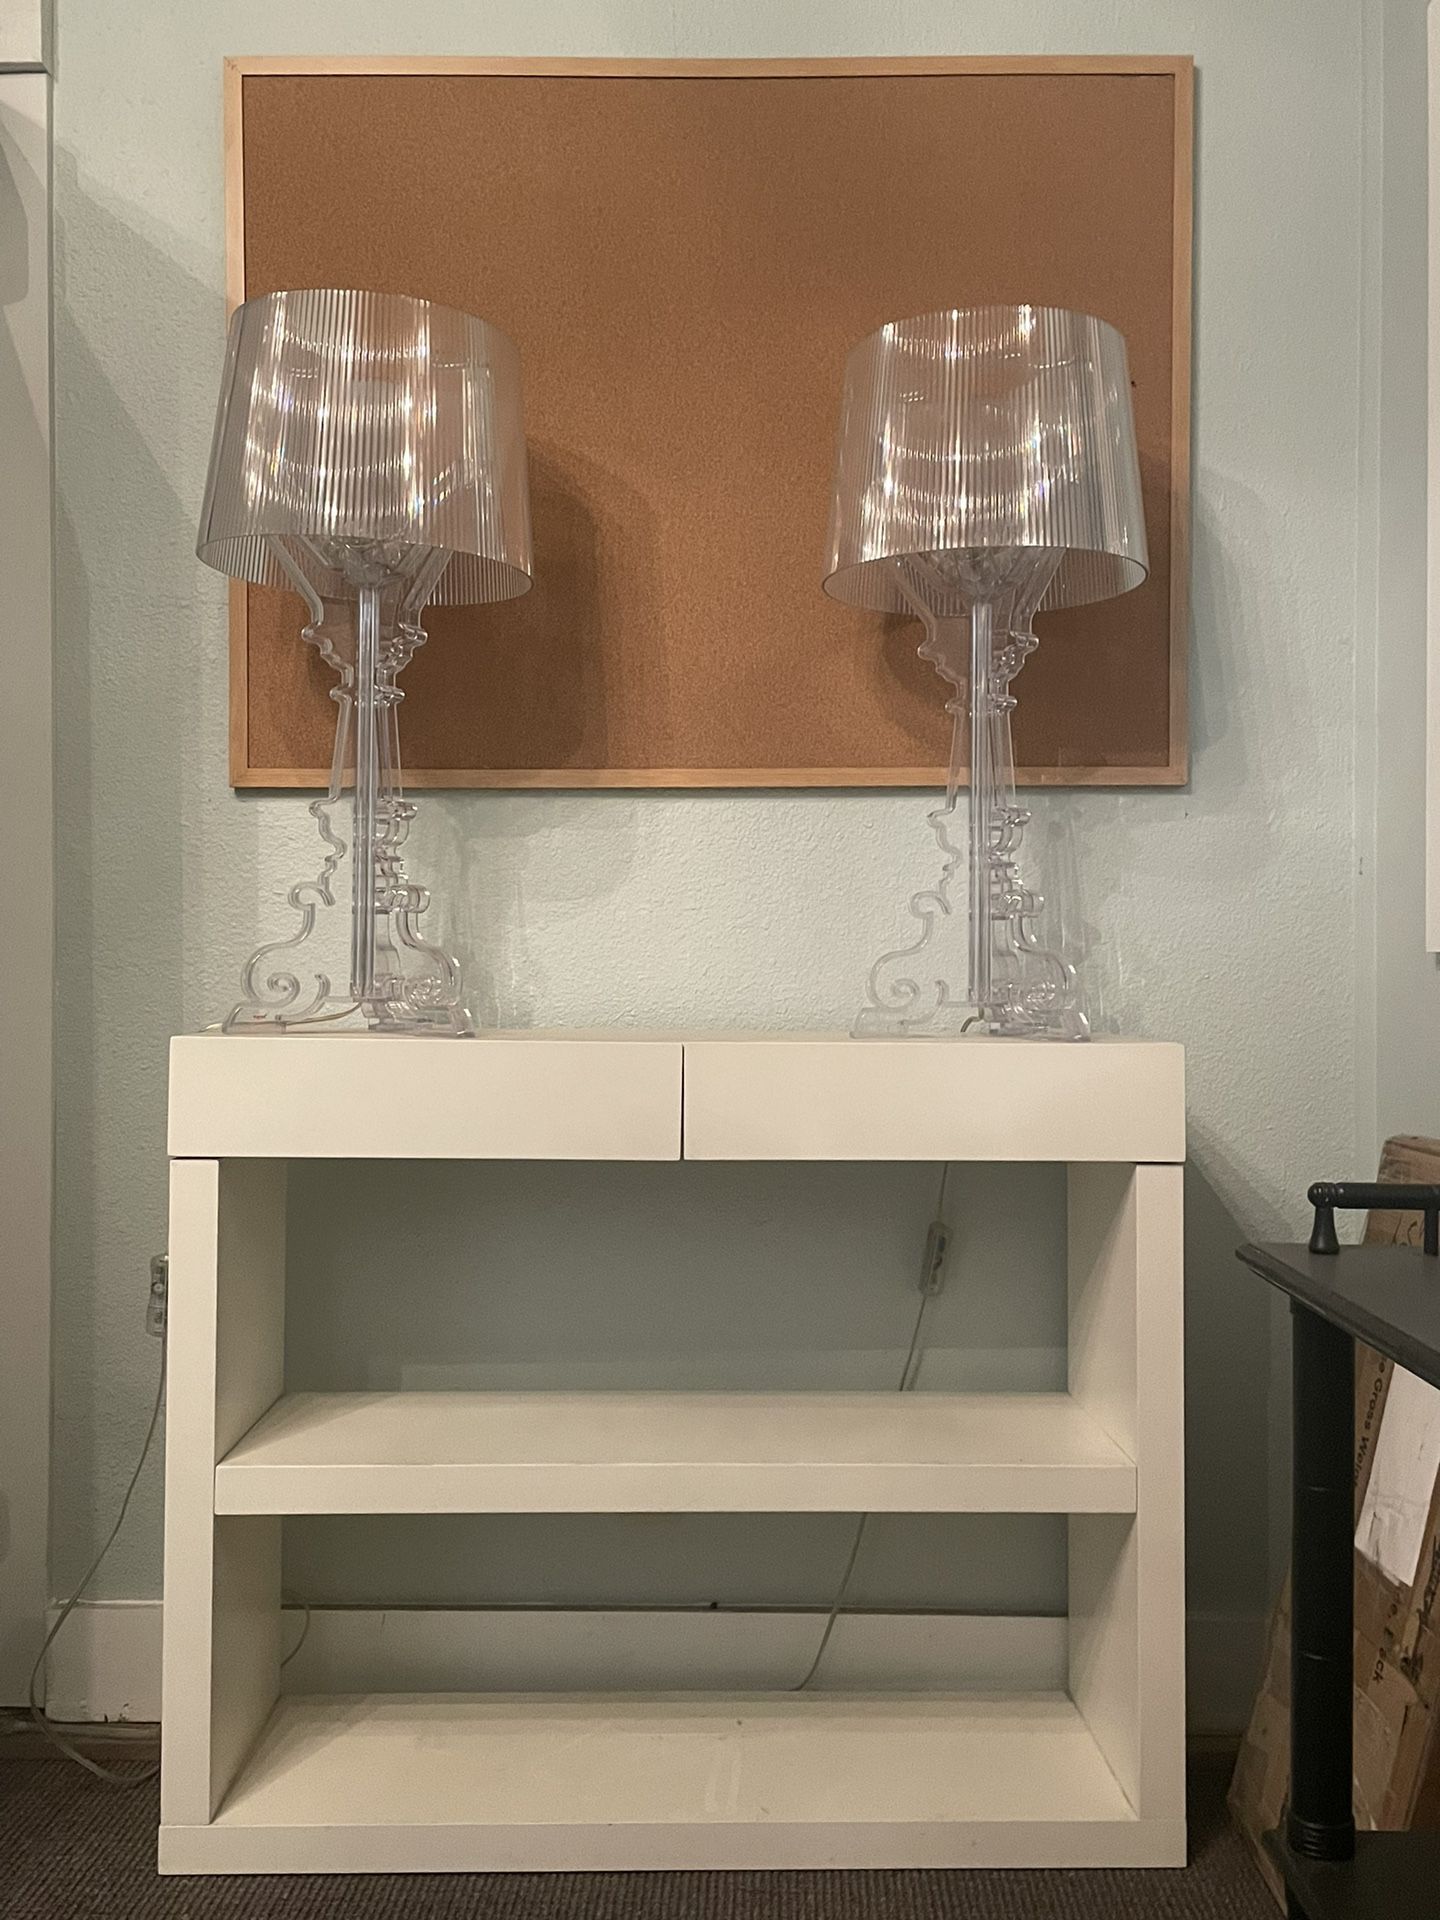 IKEA White Wooden Console Tables 